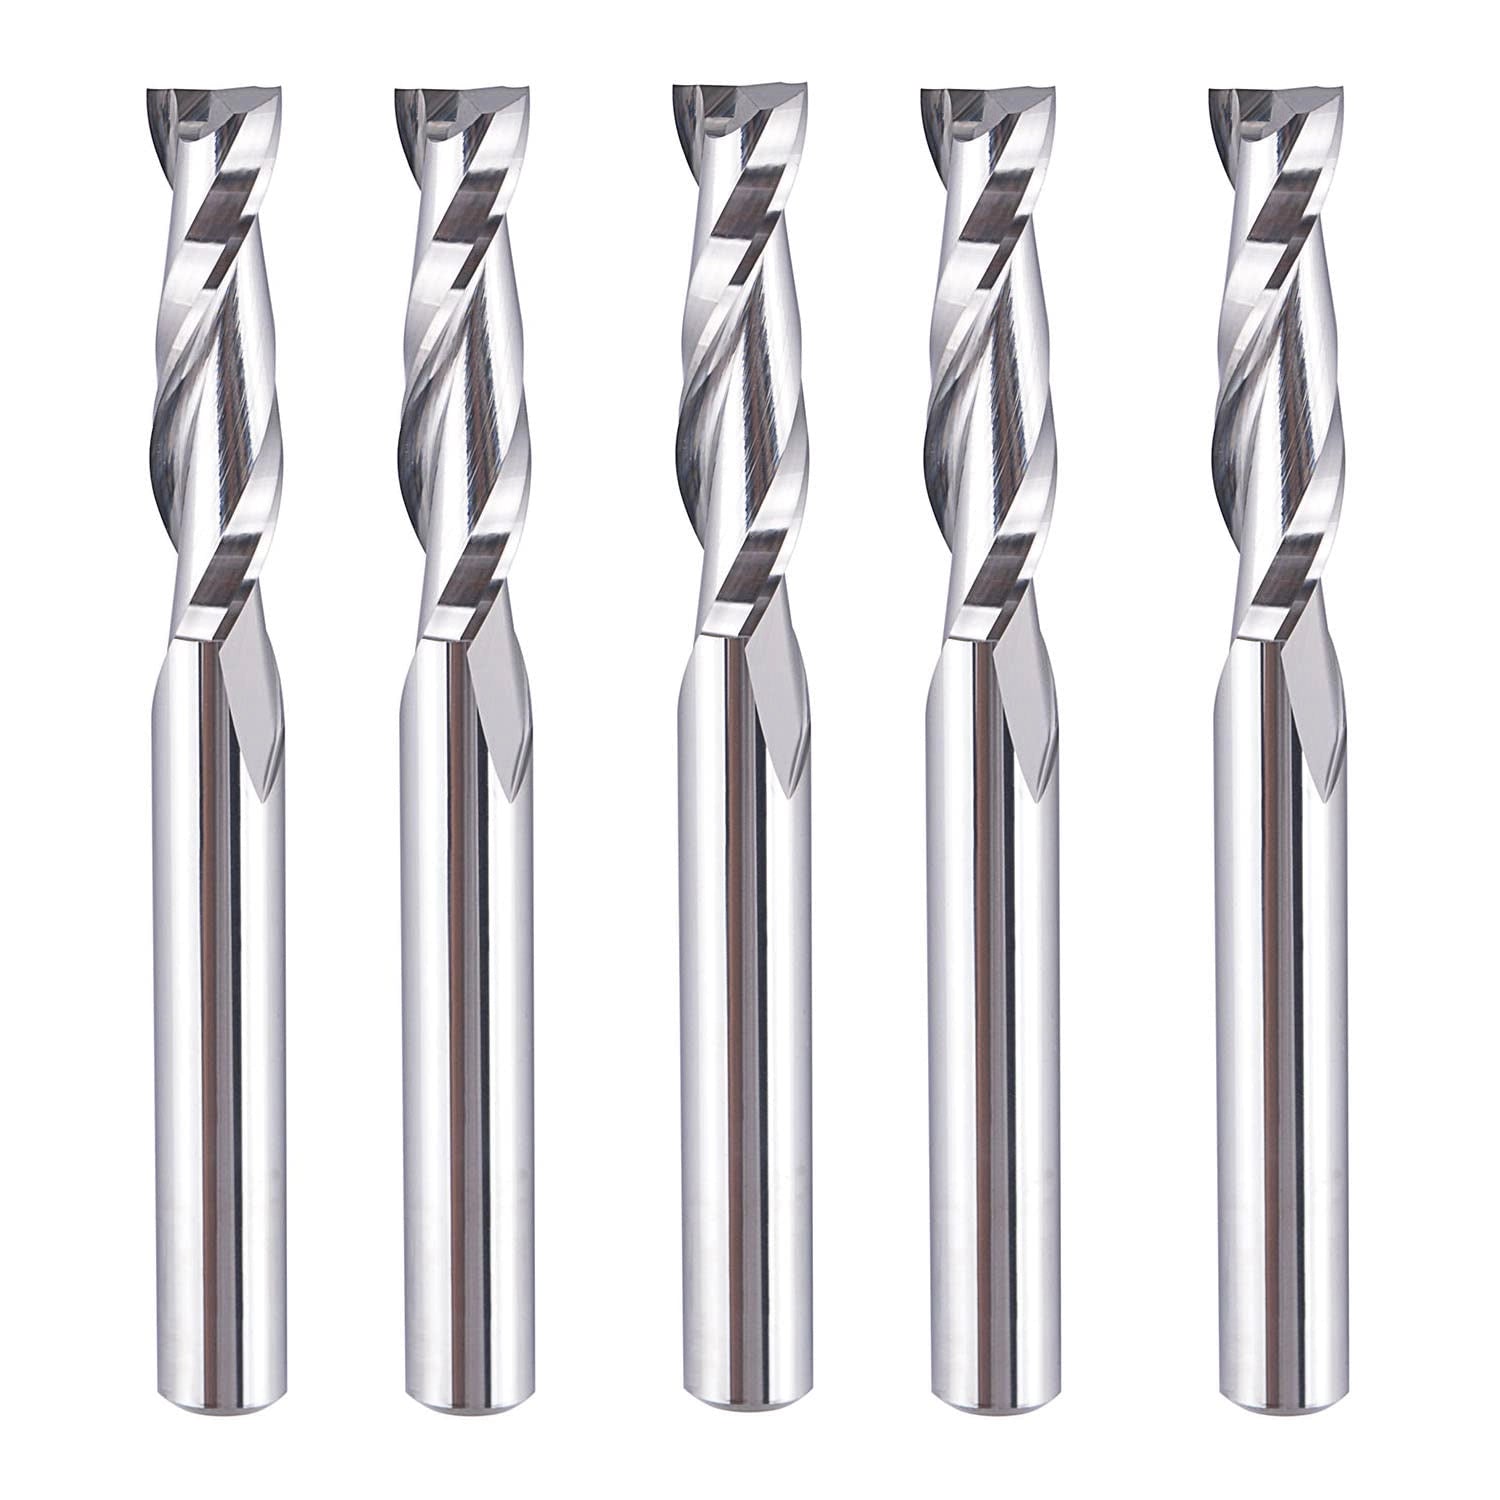 5 mm 4 flutes solid carbide end mill, shank Ø 6 mm - RCVHMF05-4, Router  fish tails, CUTTING TOOLS